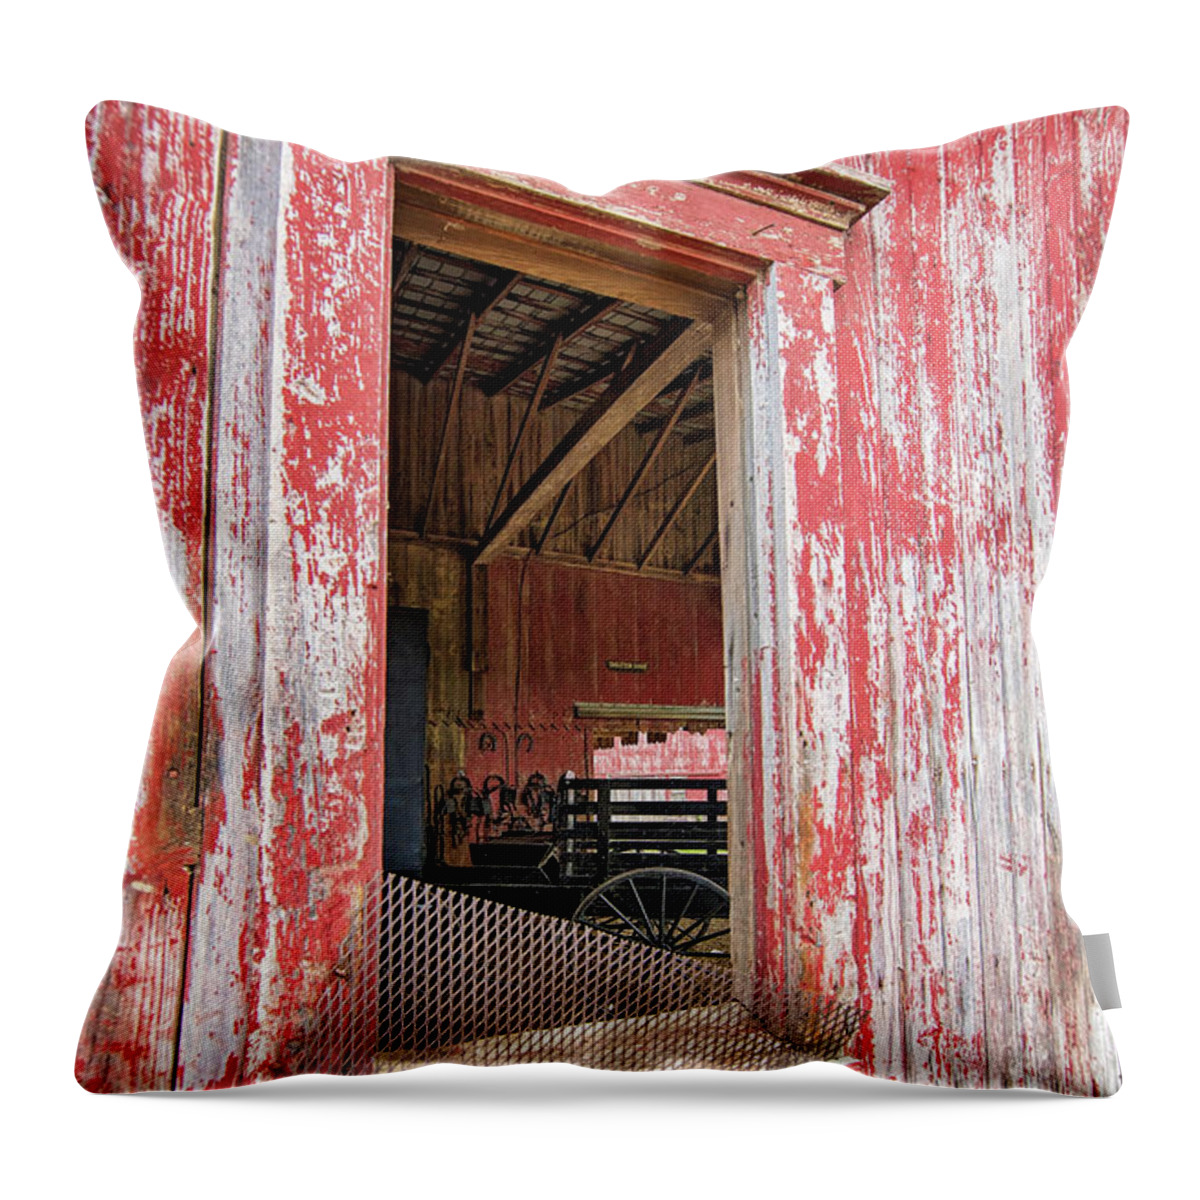 Amish Throw Pillow featuring the photograph Amish Buggy by Deborah Penland